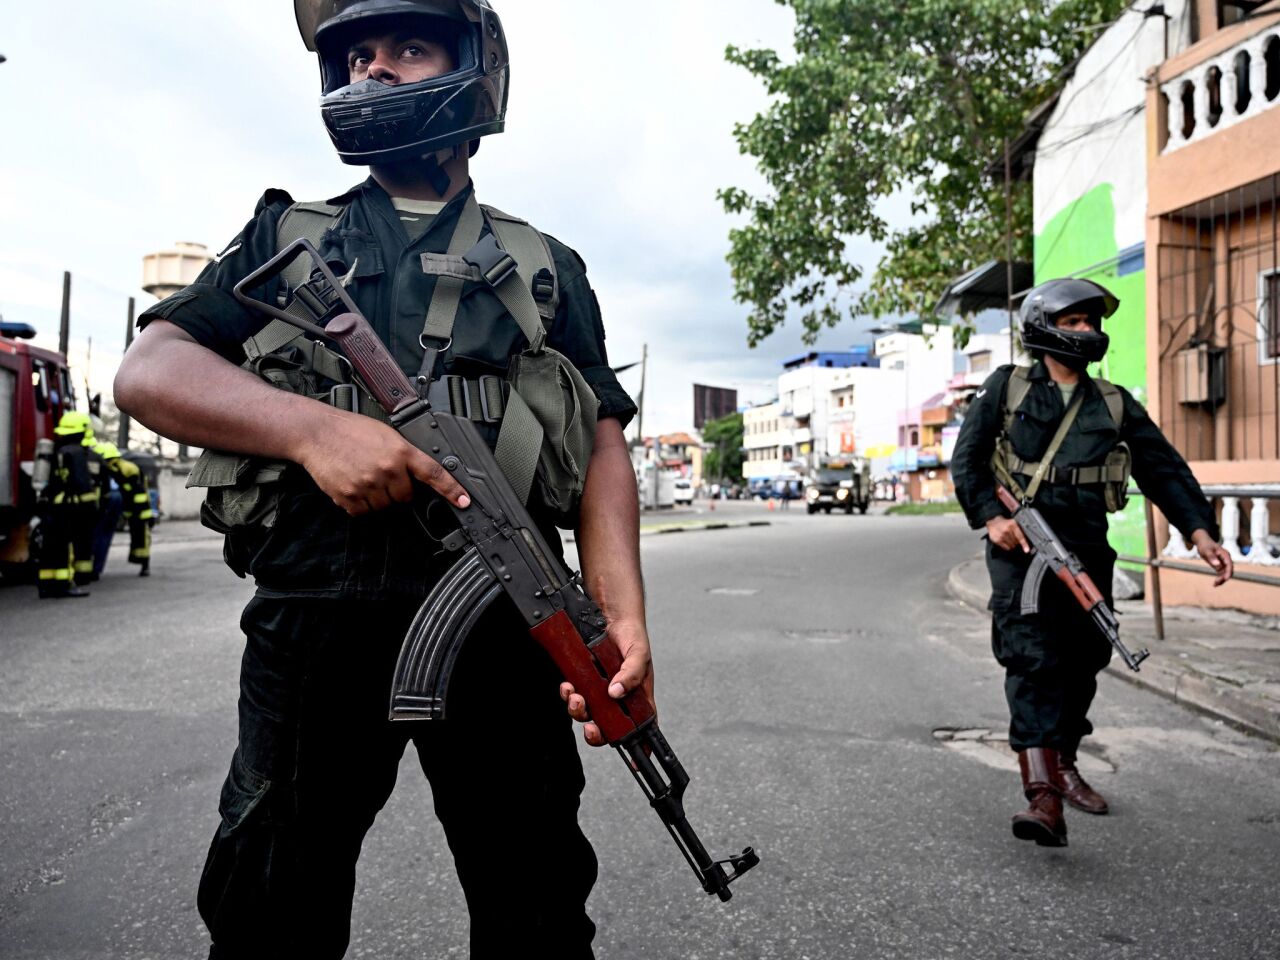 Soldiers secure an area near St. Anthony's Shrine on April 22. A device found in a van was detonated one day after a series of bomb blasts targeted churches and luxury hotels in Sri Lanka.